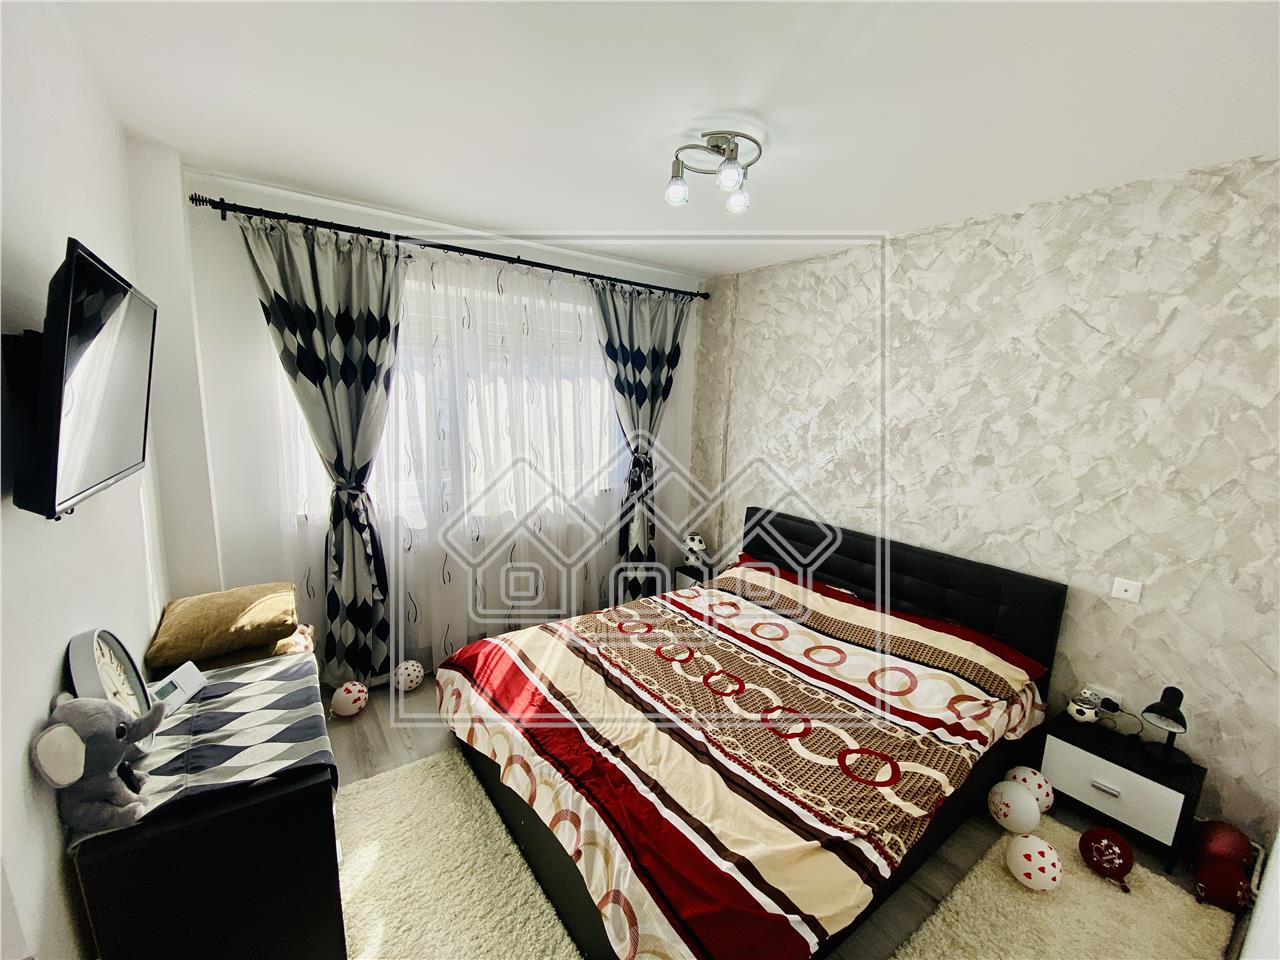 Apartment for sale in Sibiu - 2 rooms, balcony and cellar - Siretului